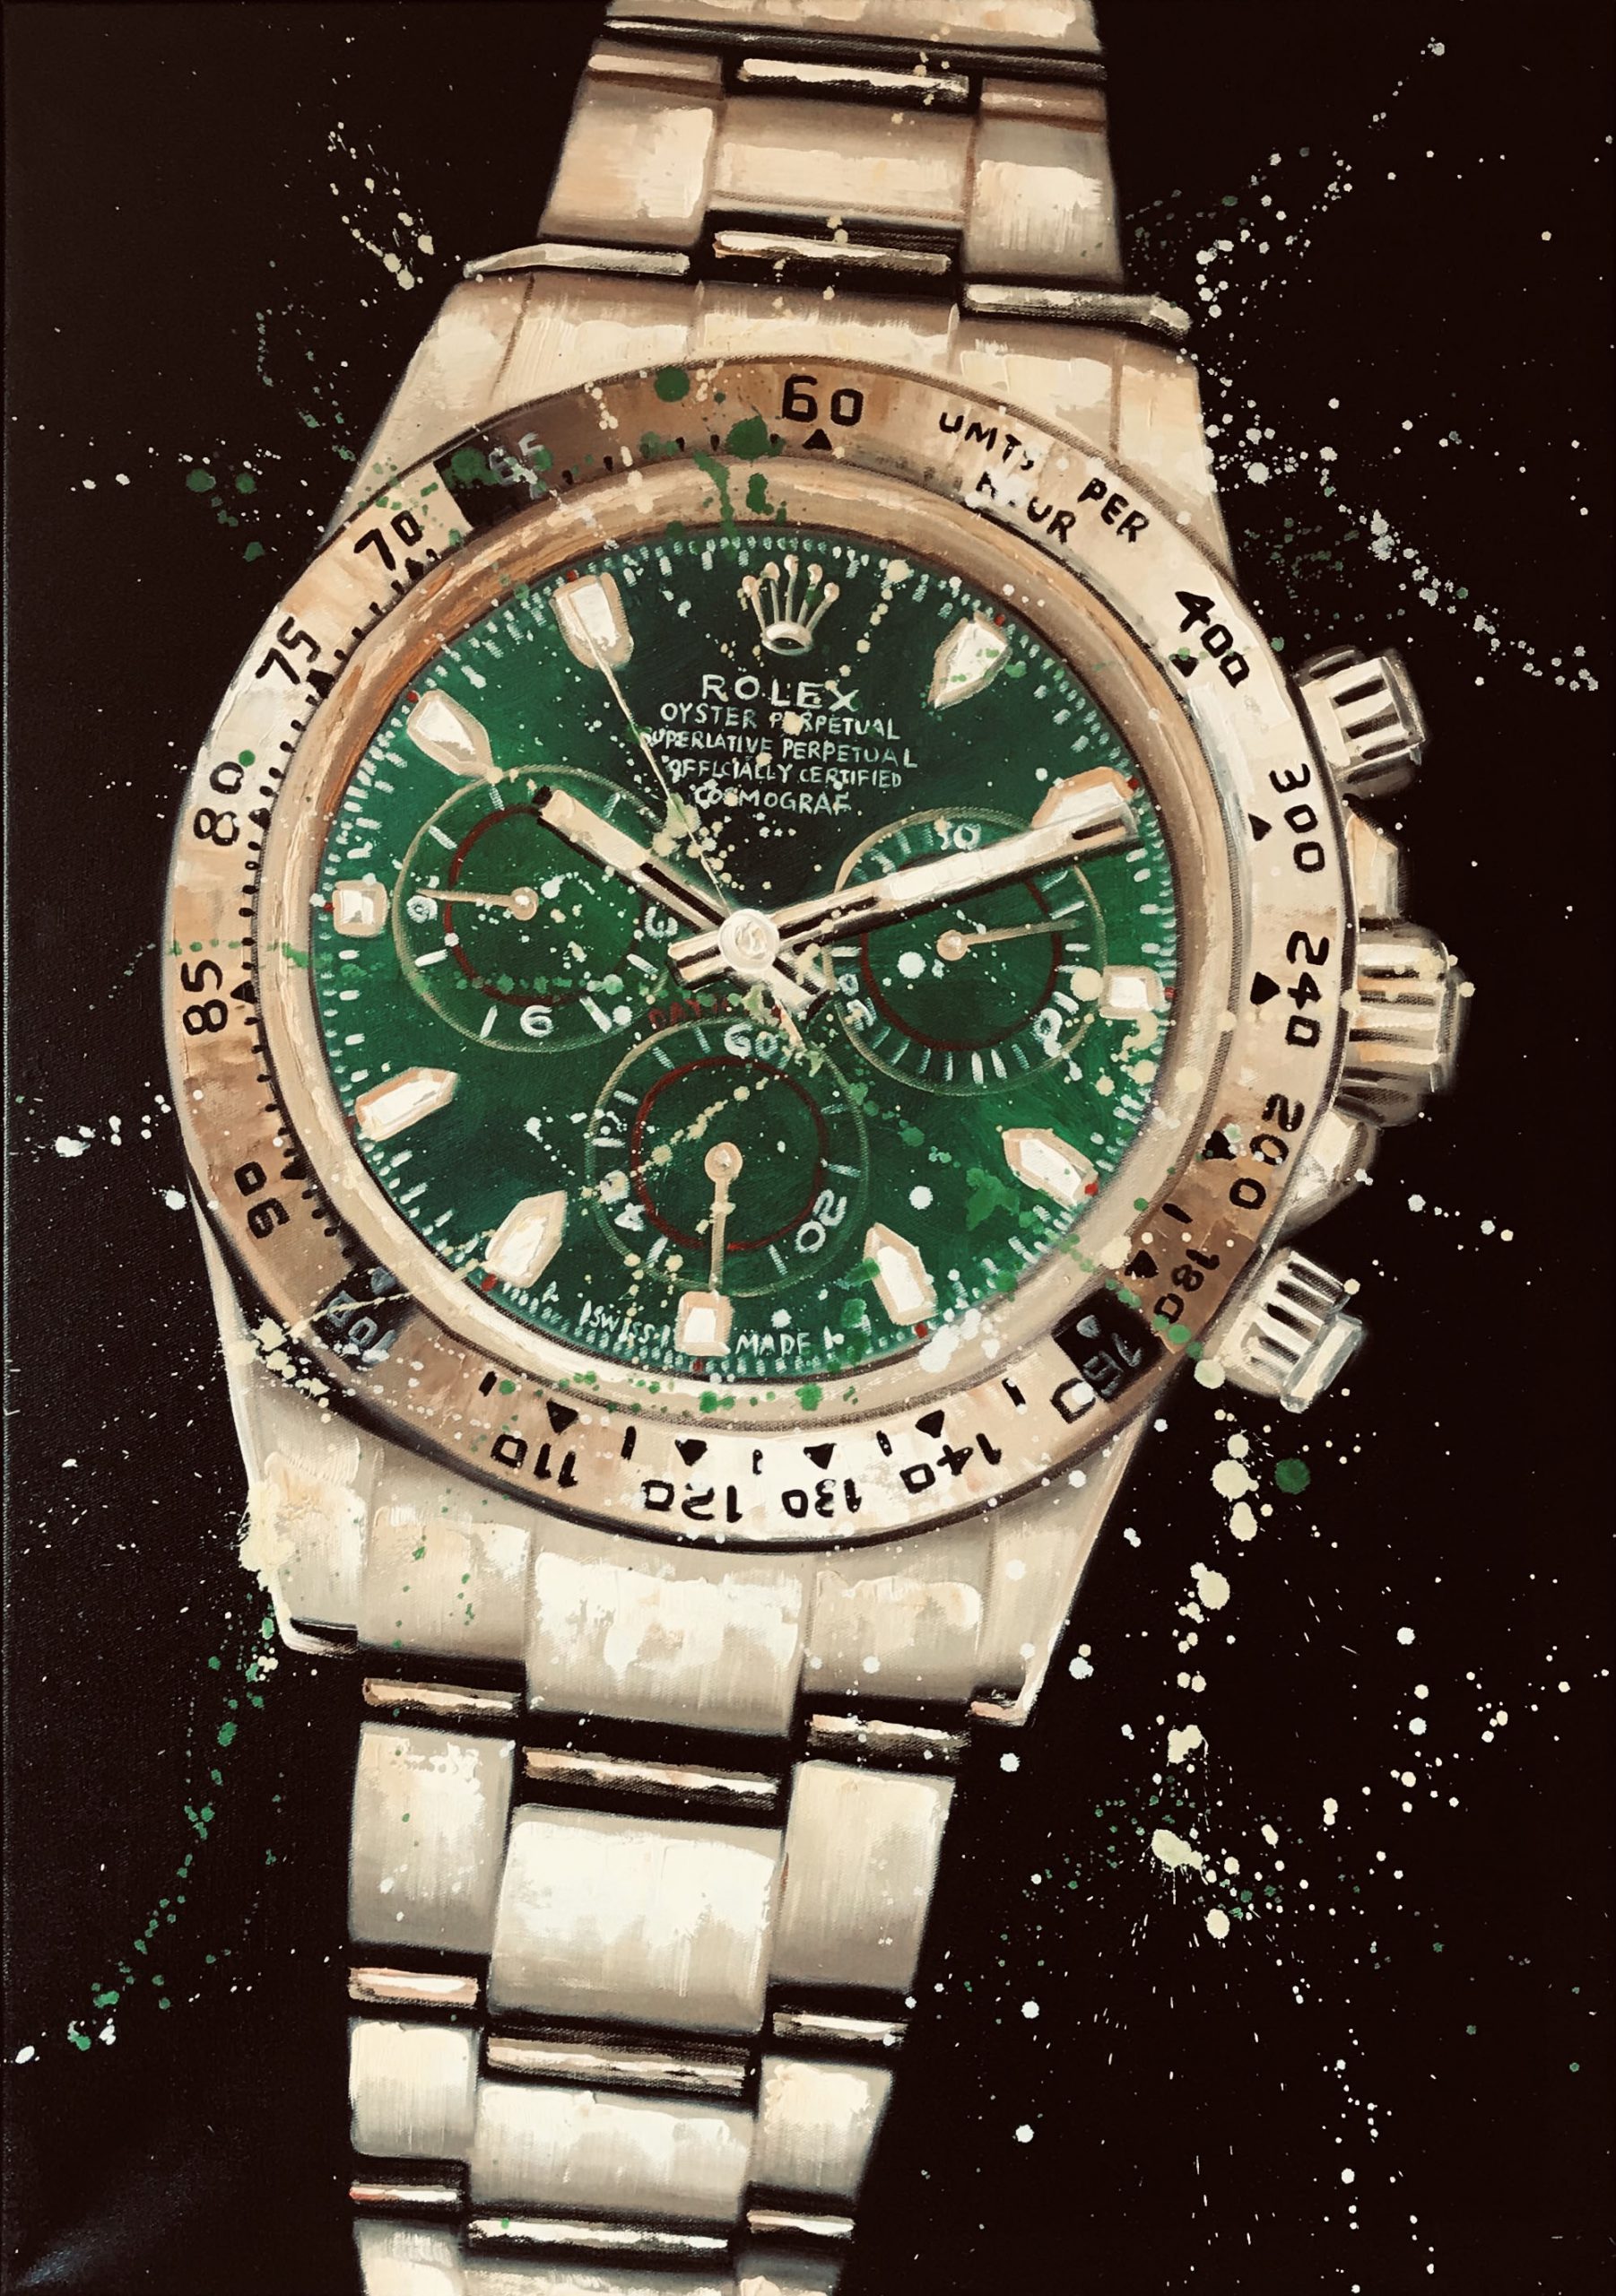 rolex watch painting